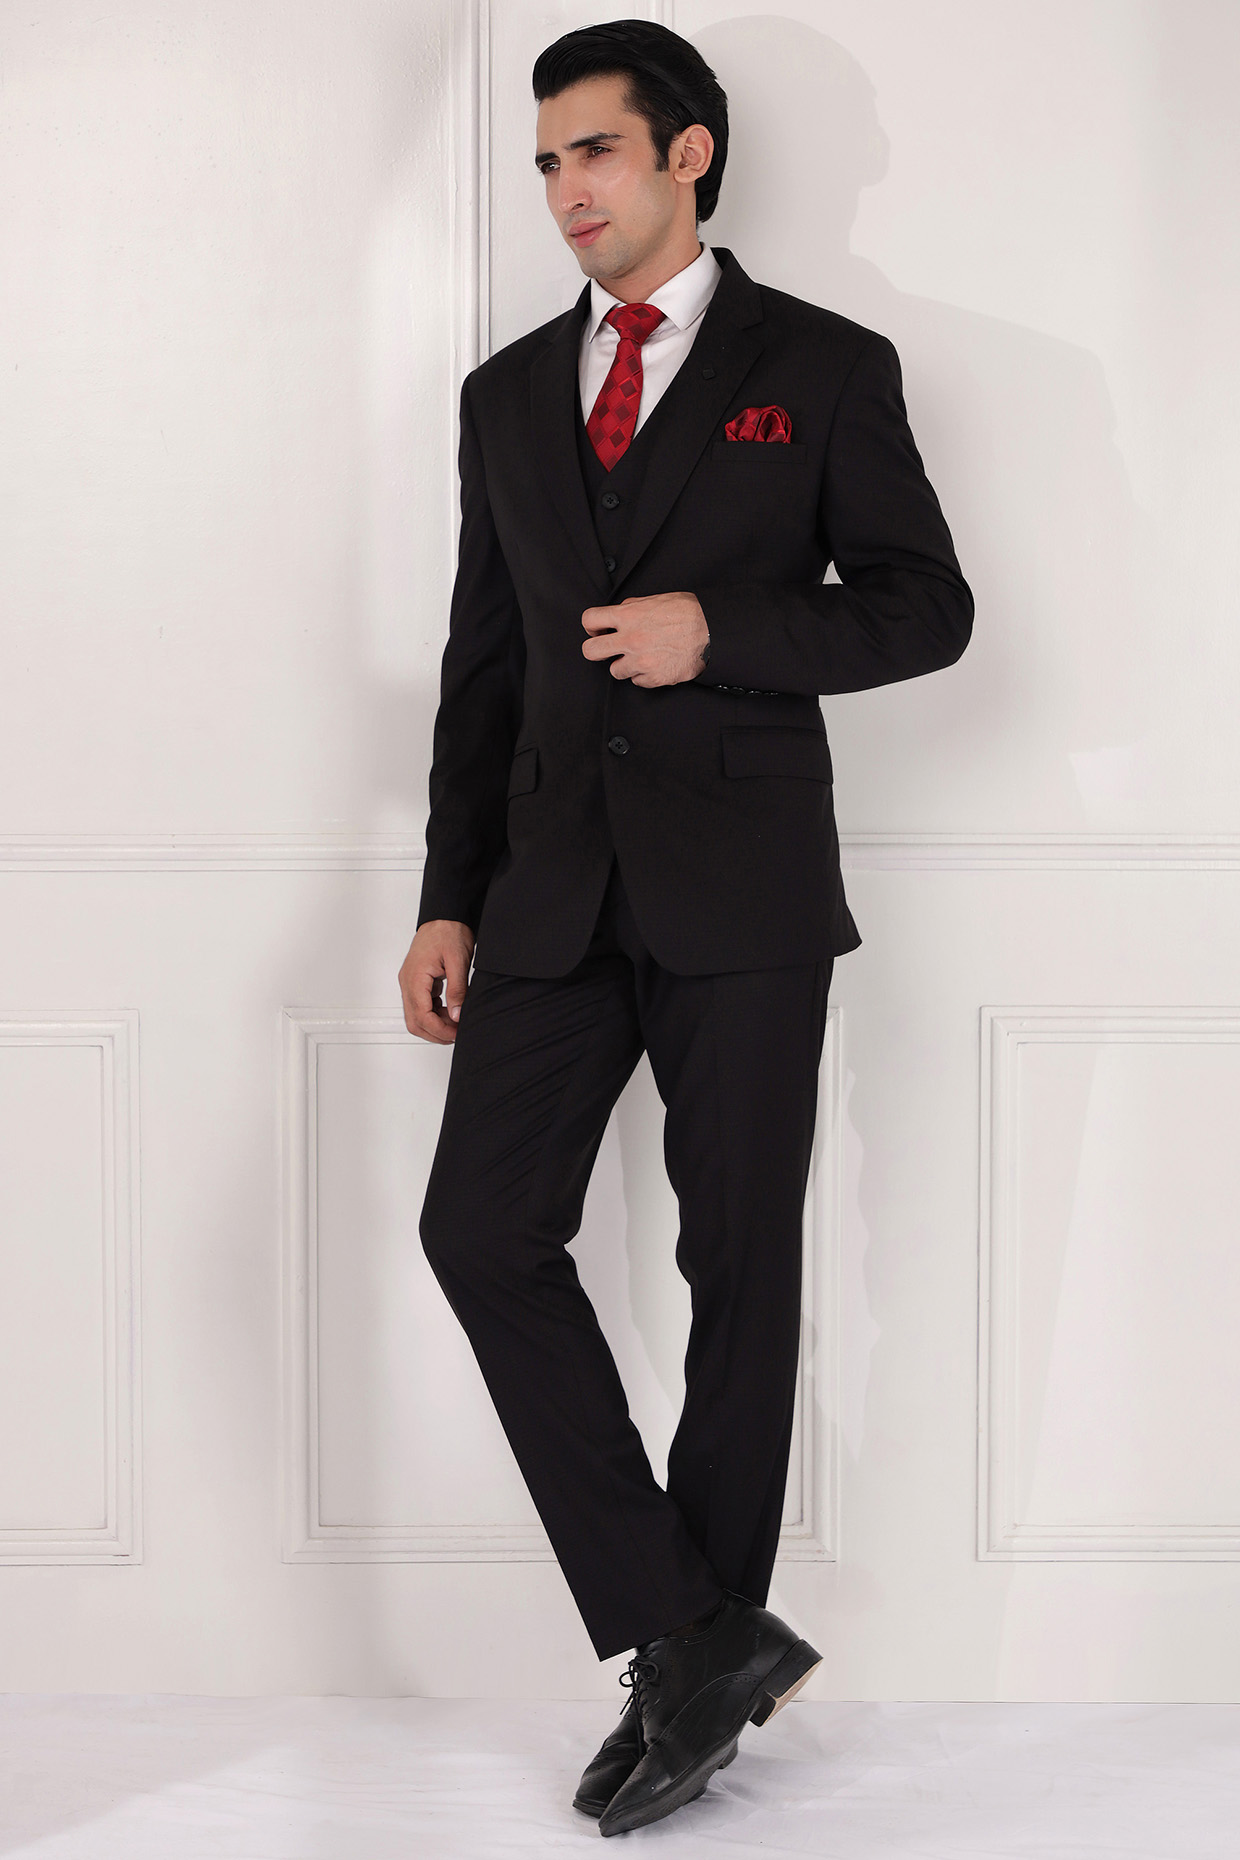 Men Casual Trousers - Buy Mens Casual Trousers Online With Discounted  Pricing At Ketch